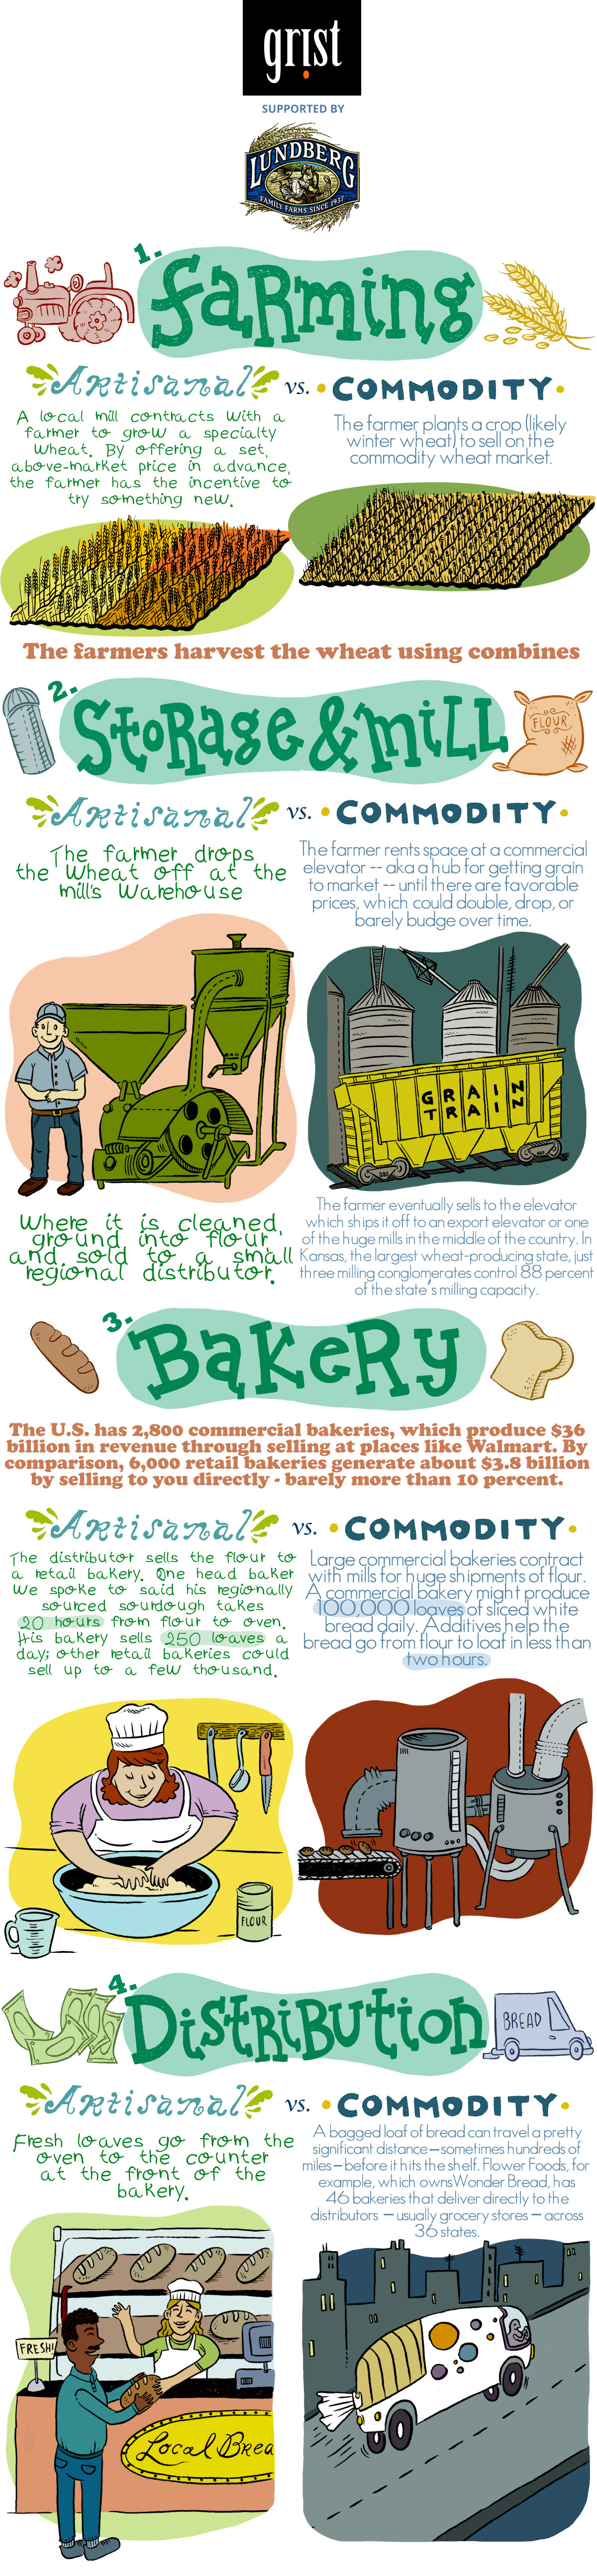 Bread Timeline: This infographic shows why good bread costs more dough